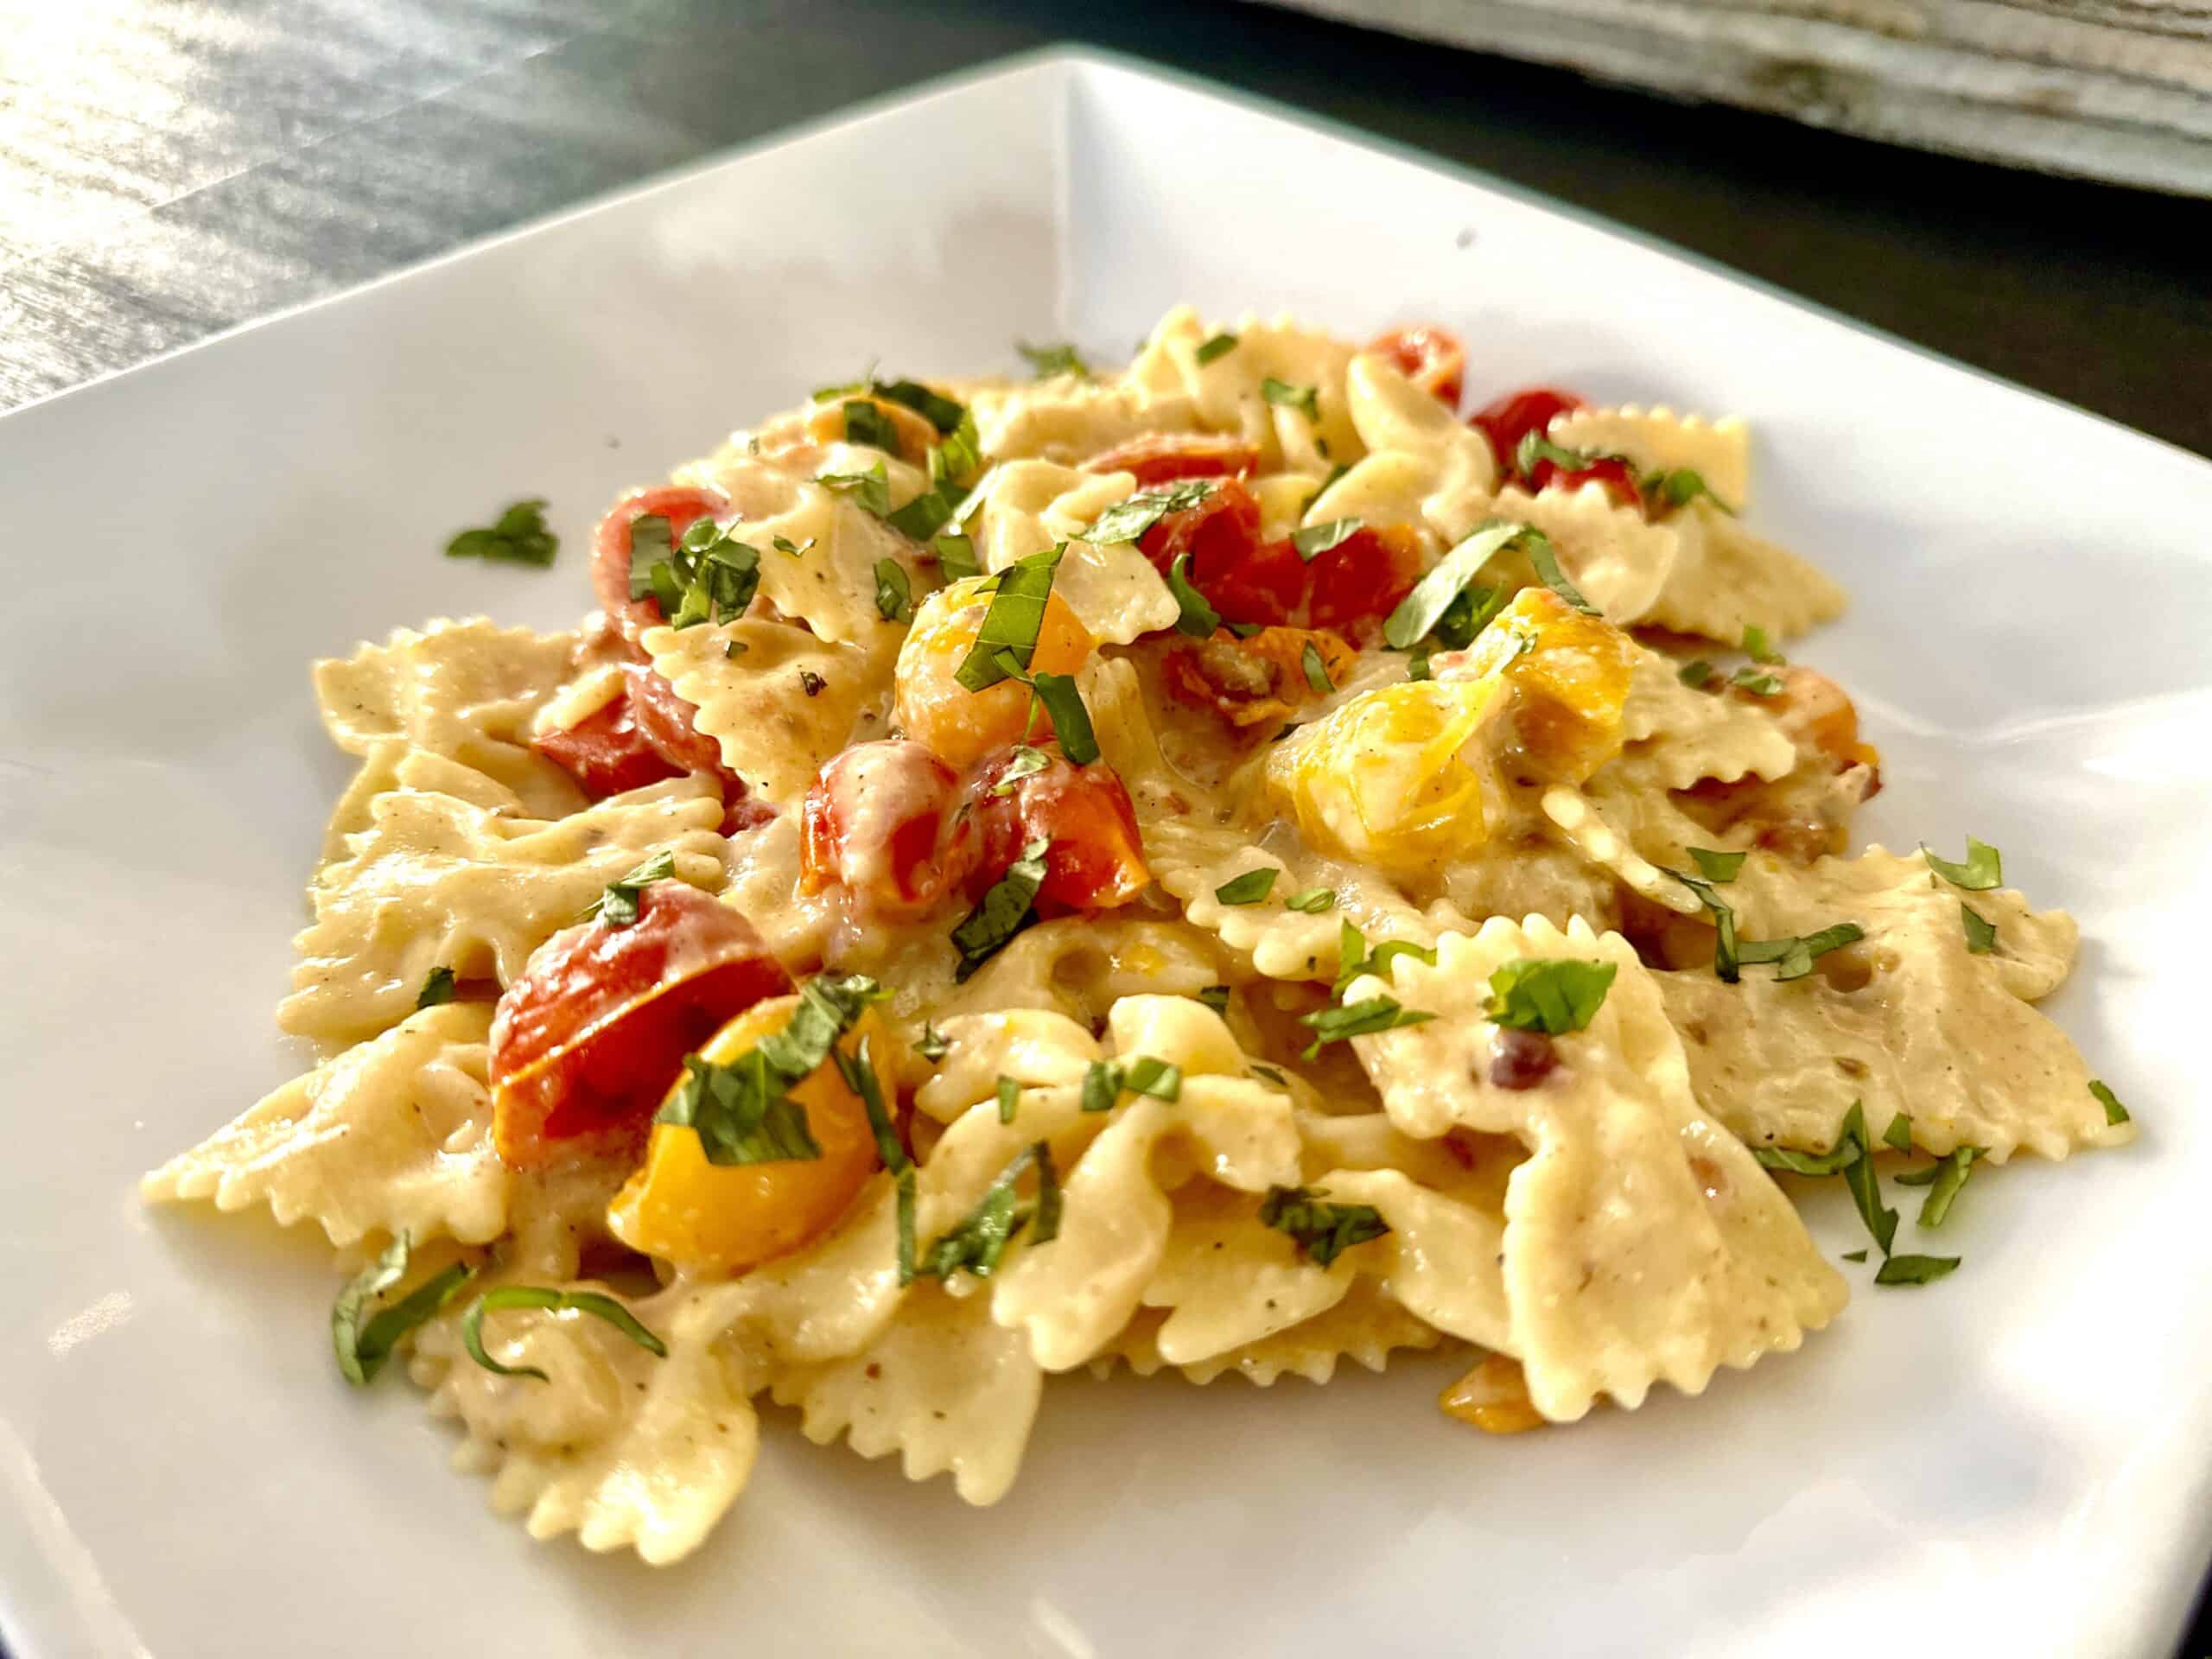 New 30-Minute Spicy Tomato Carbonara Recipe Your Family Will Love